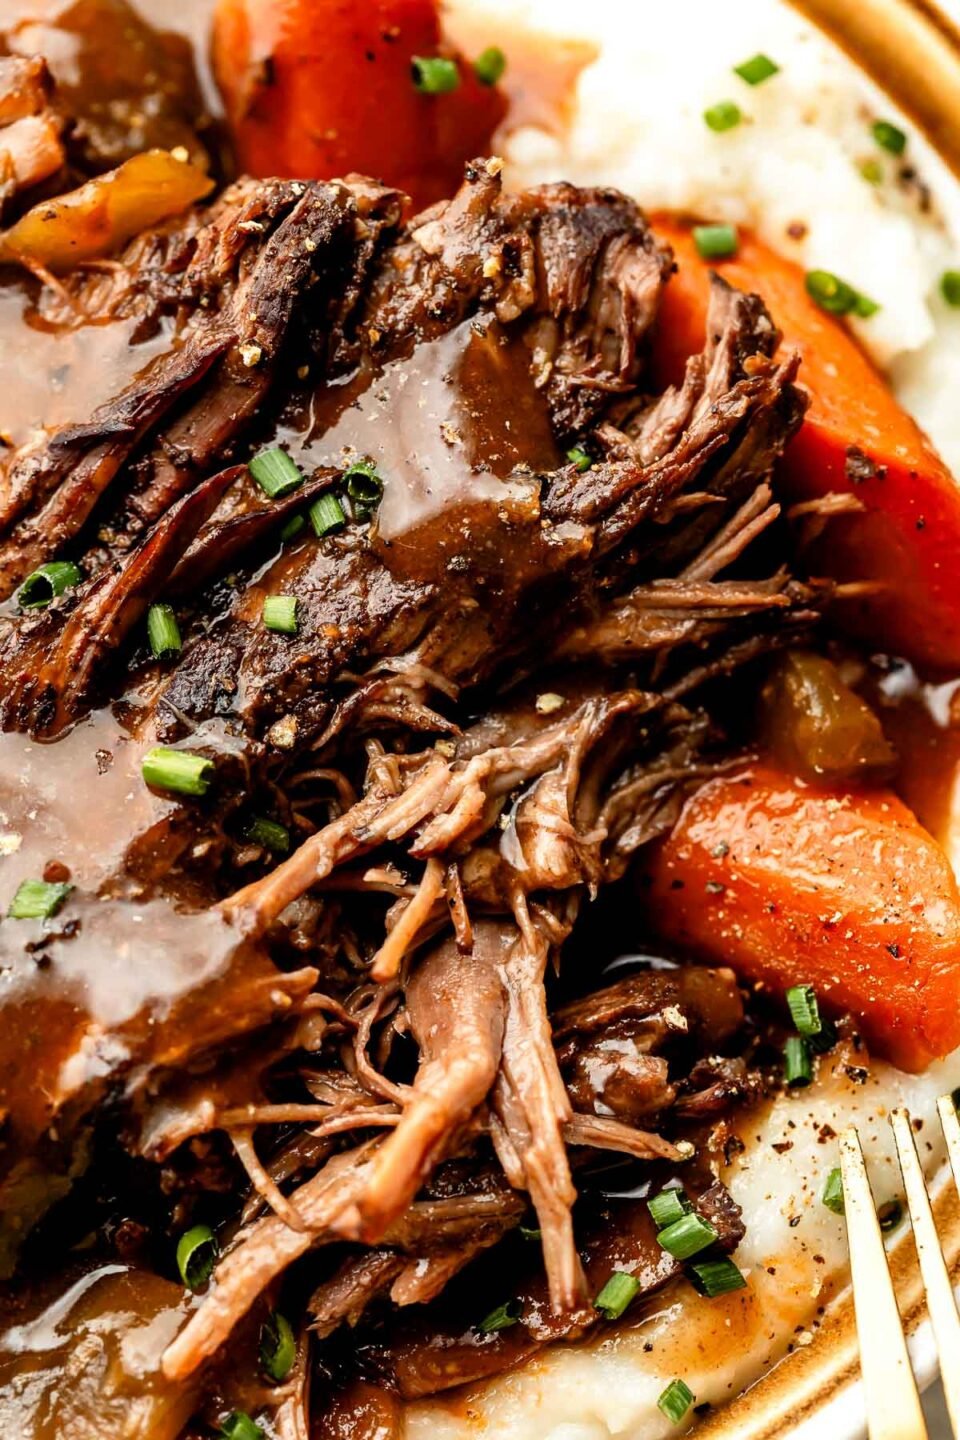 A close-up macro shot of braised beef topped with braising liquid on a bed of mashed potatoes and vegetables.